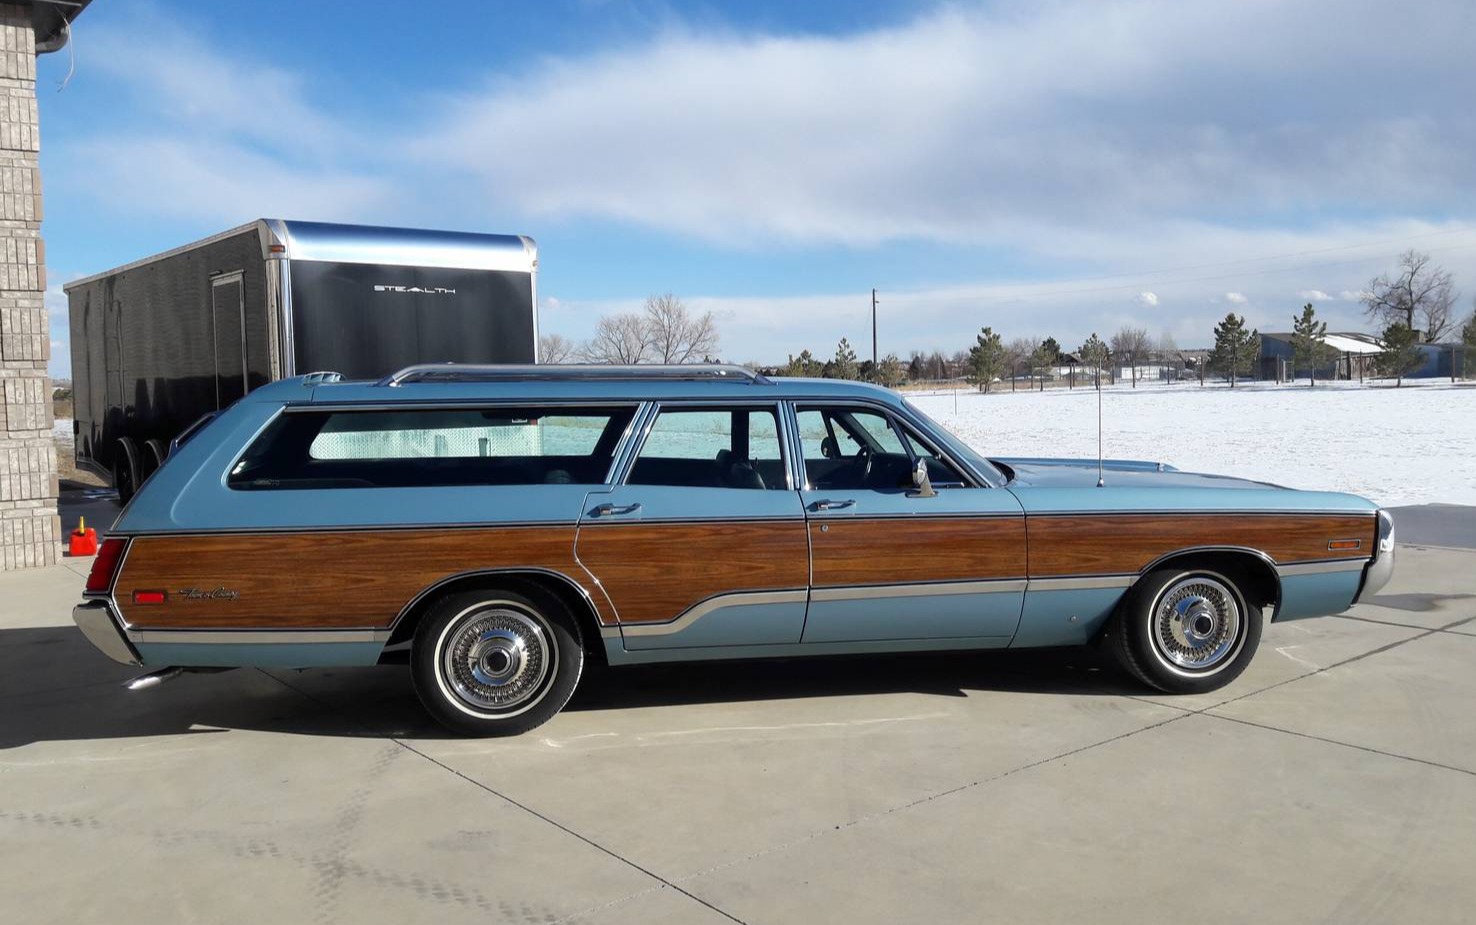 bahama-mama-42k-mile-1970-chrysler-town-and-country-wagonBahama Mama: 42k-Mile 1970 Chrysler Town & Country Wagon<br>
77843191-770-0@2X